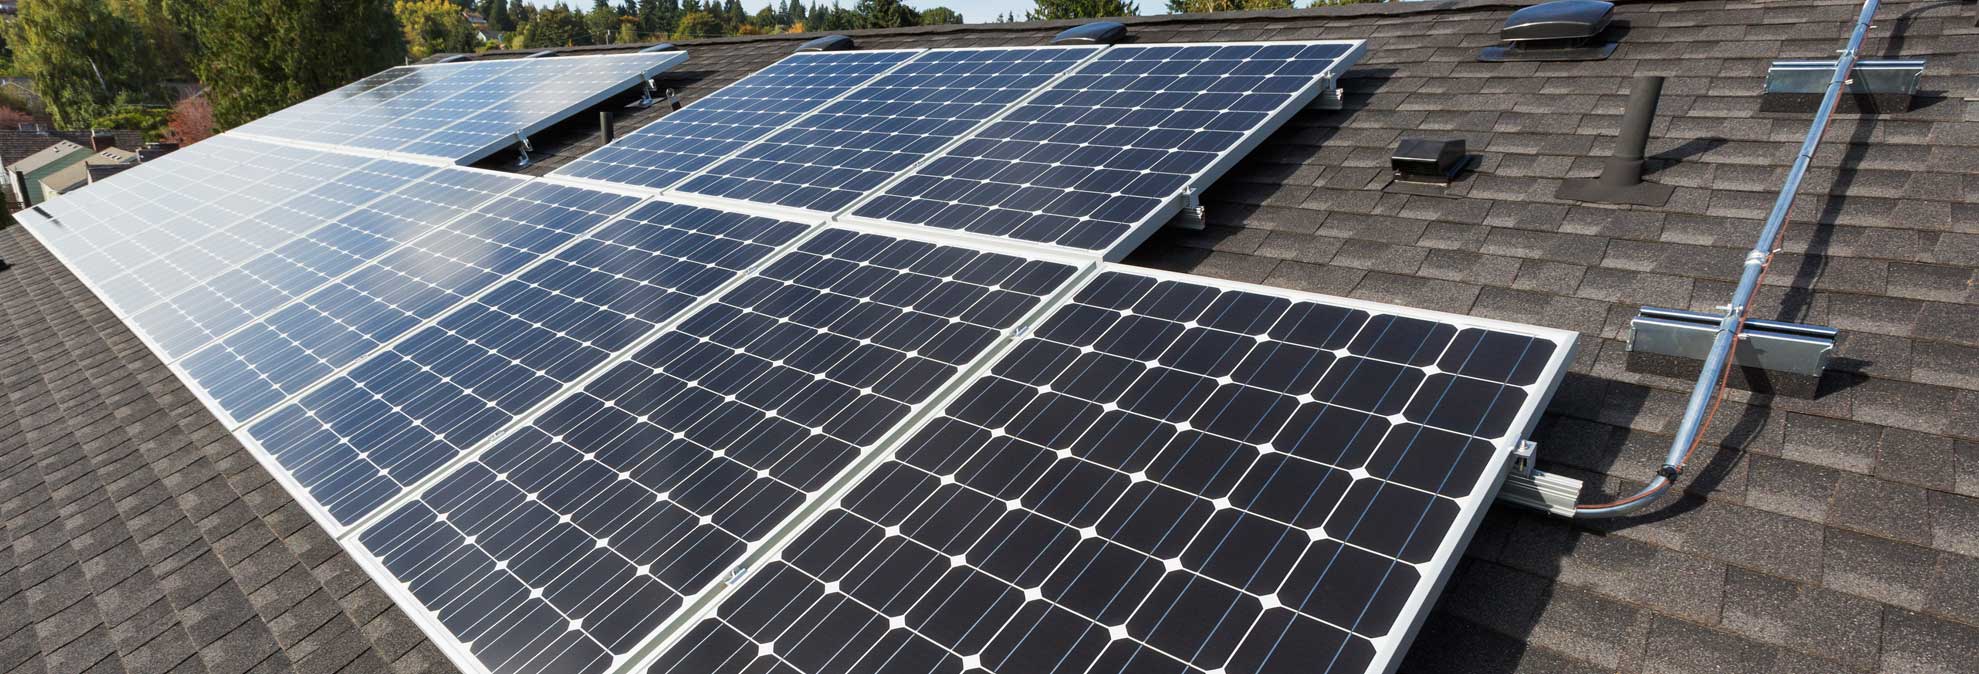 6 Successful Solar Power Projects and What They Cost